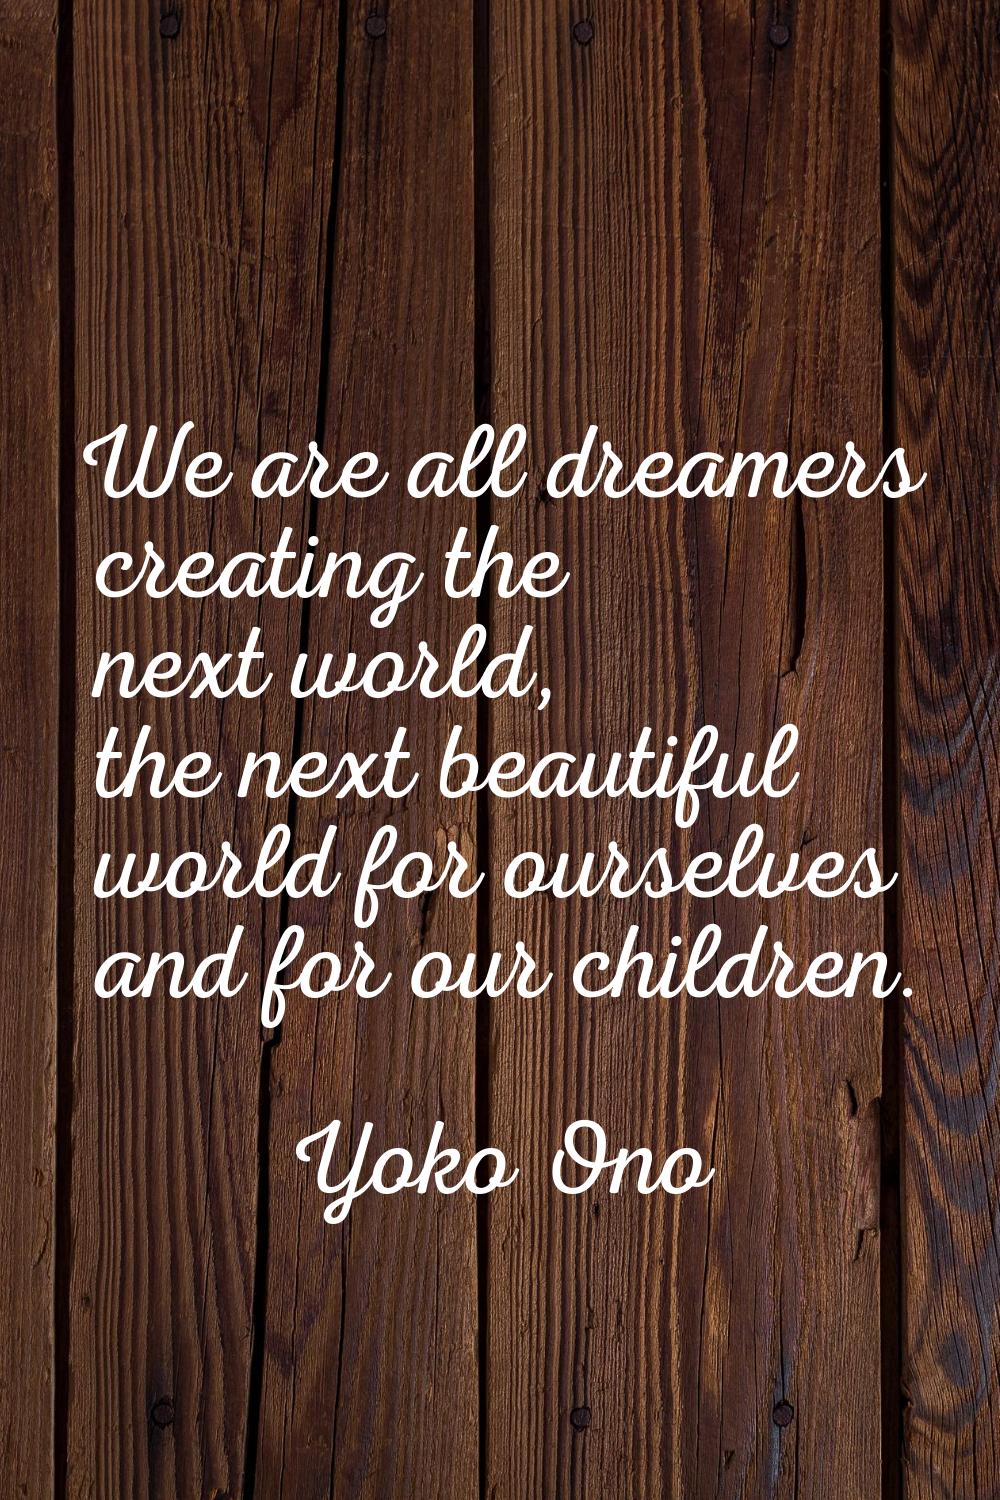 We are all dreamers creating the next world, the next beautiful world for ourselves and for our chi